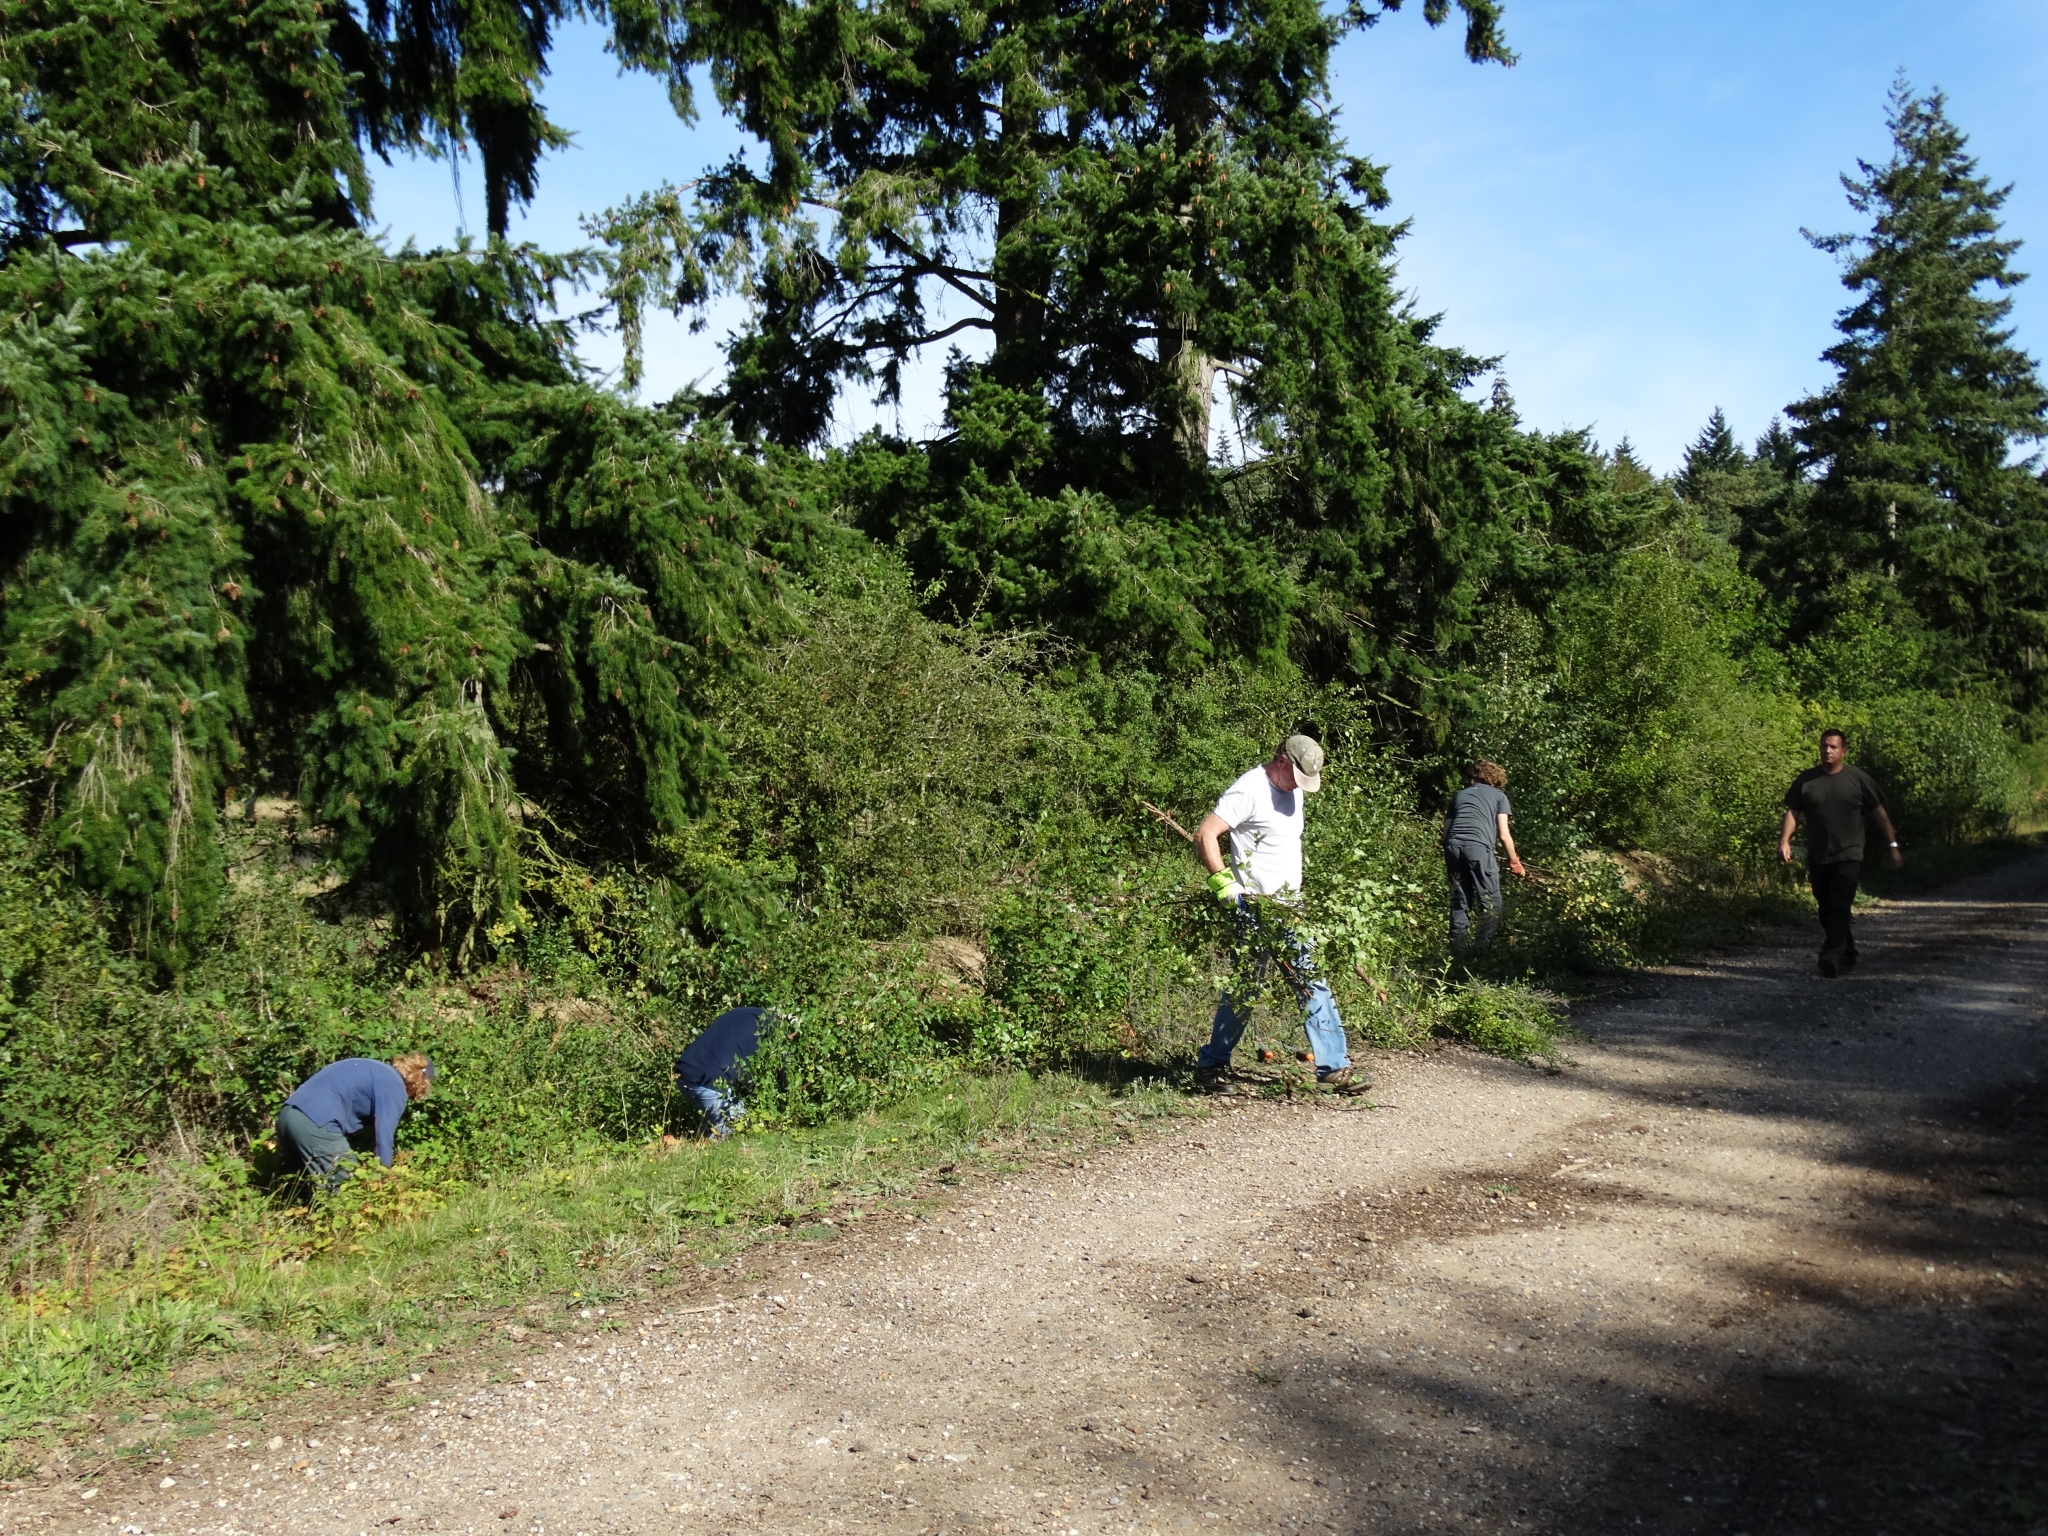 A photo from the FoTF Conservation Event - September 2019 - Scrub Clearance at Cranwich Camp : Volunteers work to clear the scrub alongside unmade road